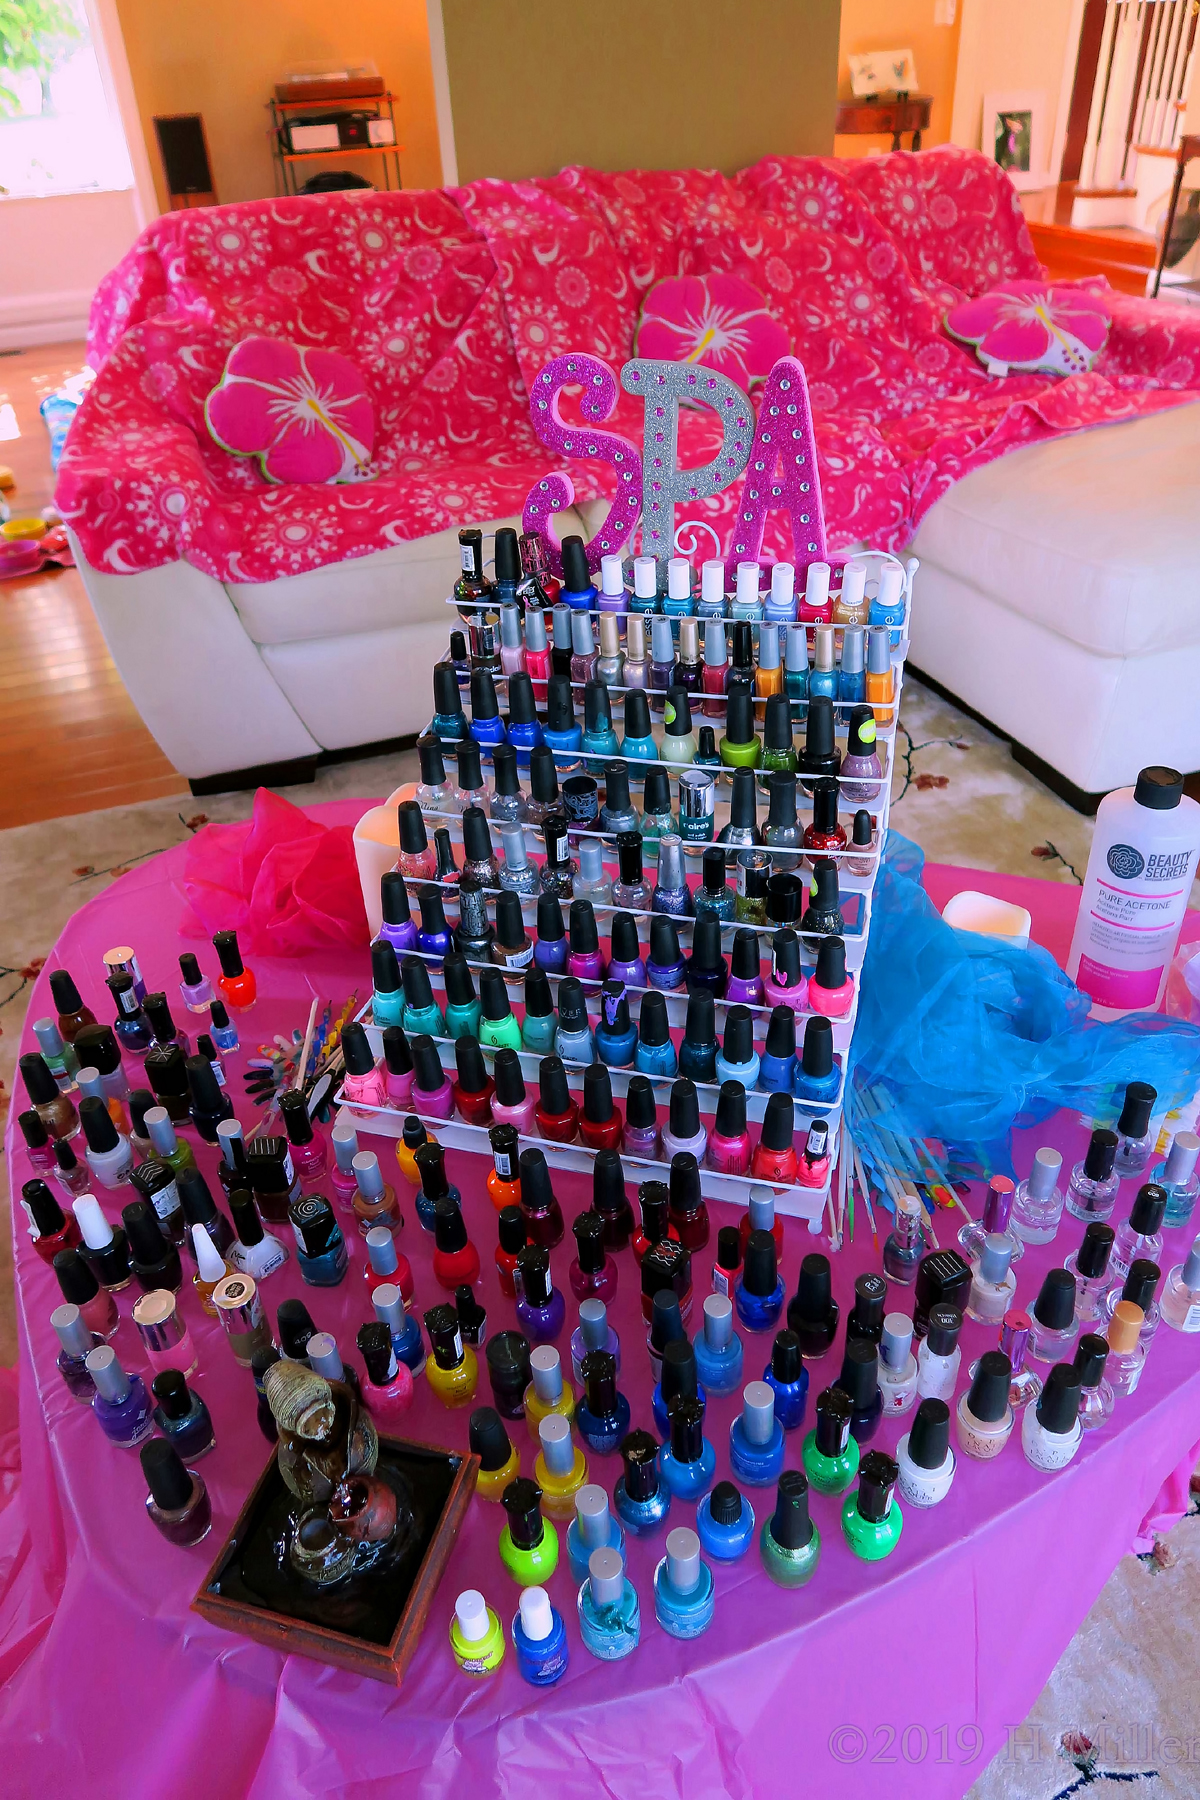 Treasury Of Nail Polish For The Kids To Select From For Their Cool Kids Manis At The Nail Station! 